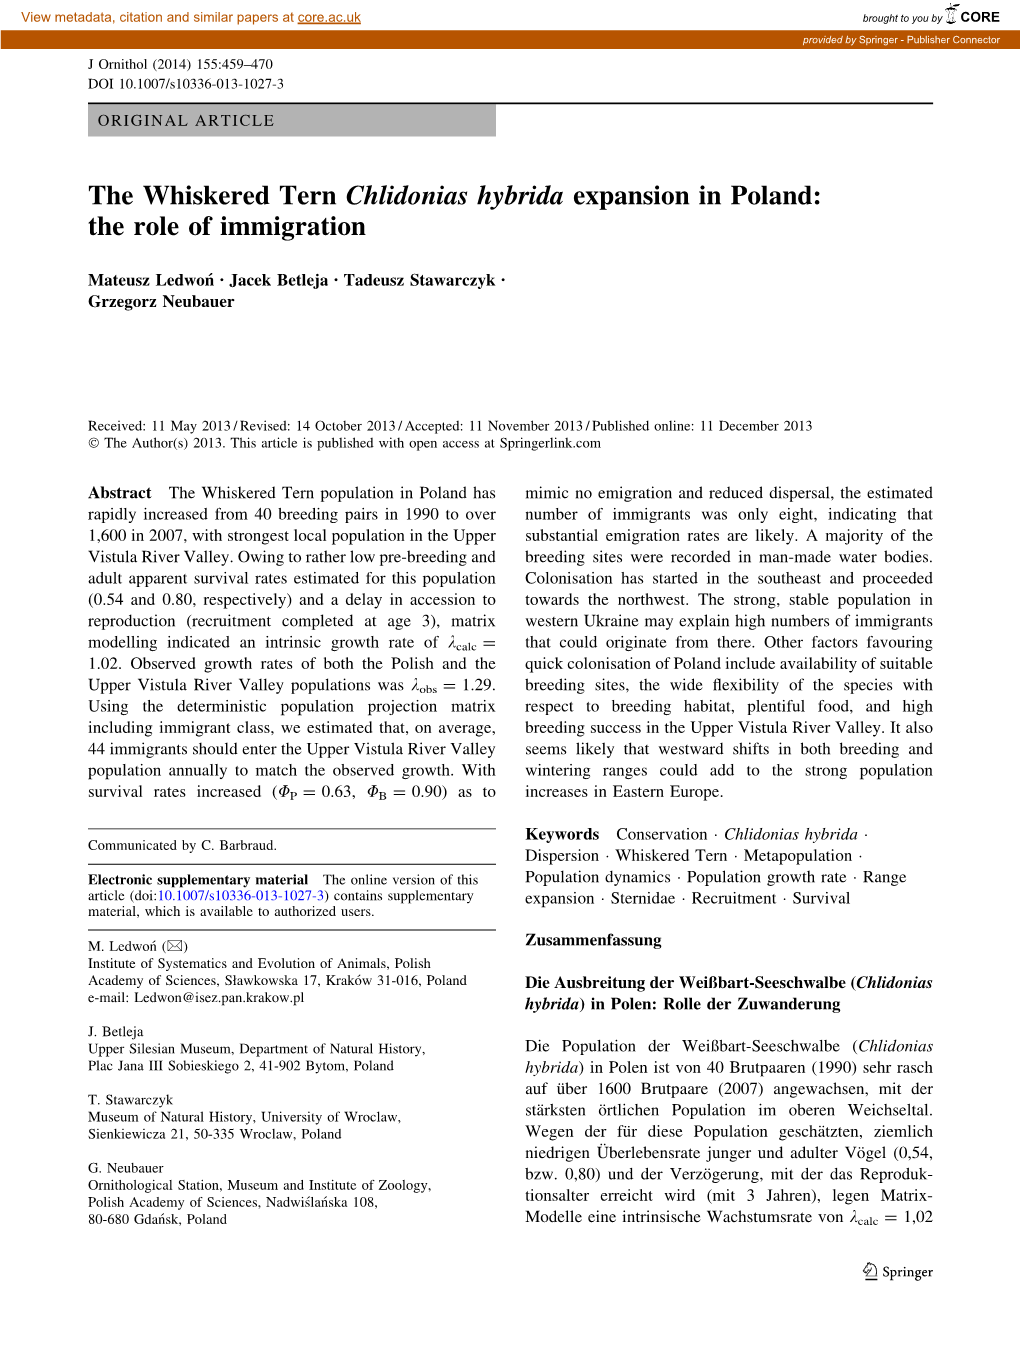 The Whiskered Tern Chlidonias Hybrida Expansion in Poland: the Role of Immigration